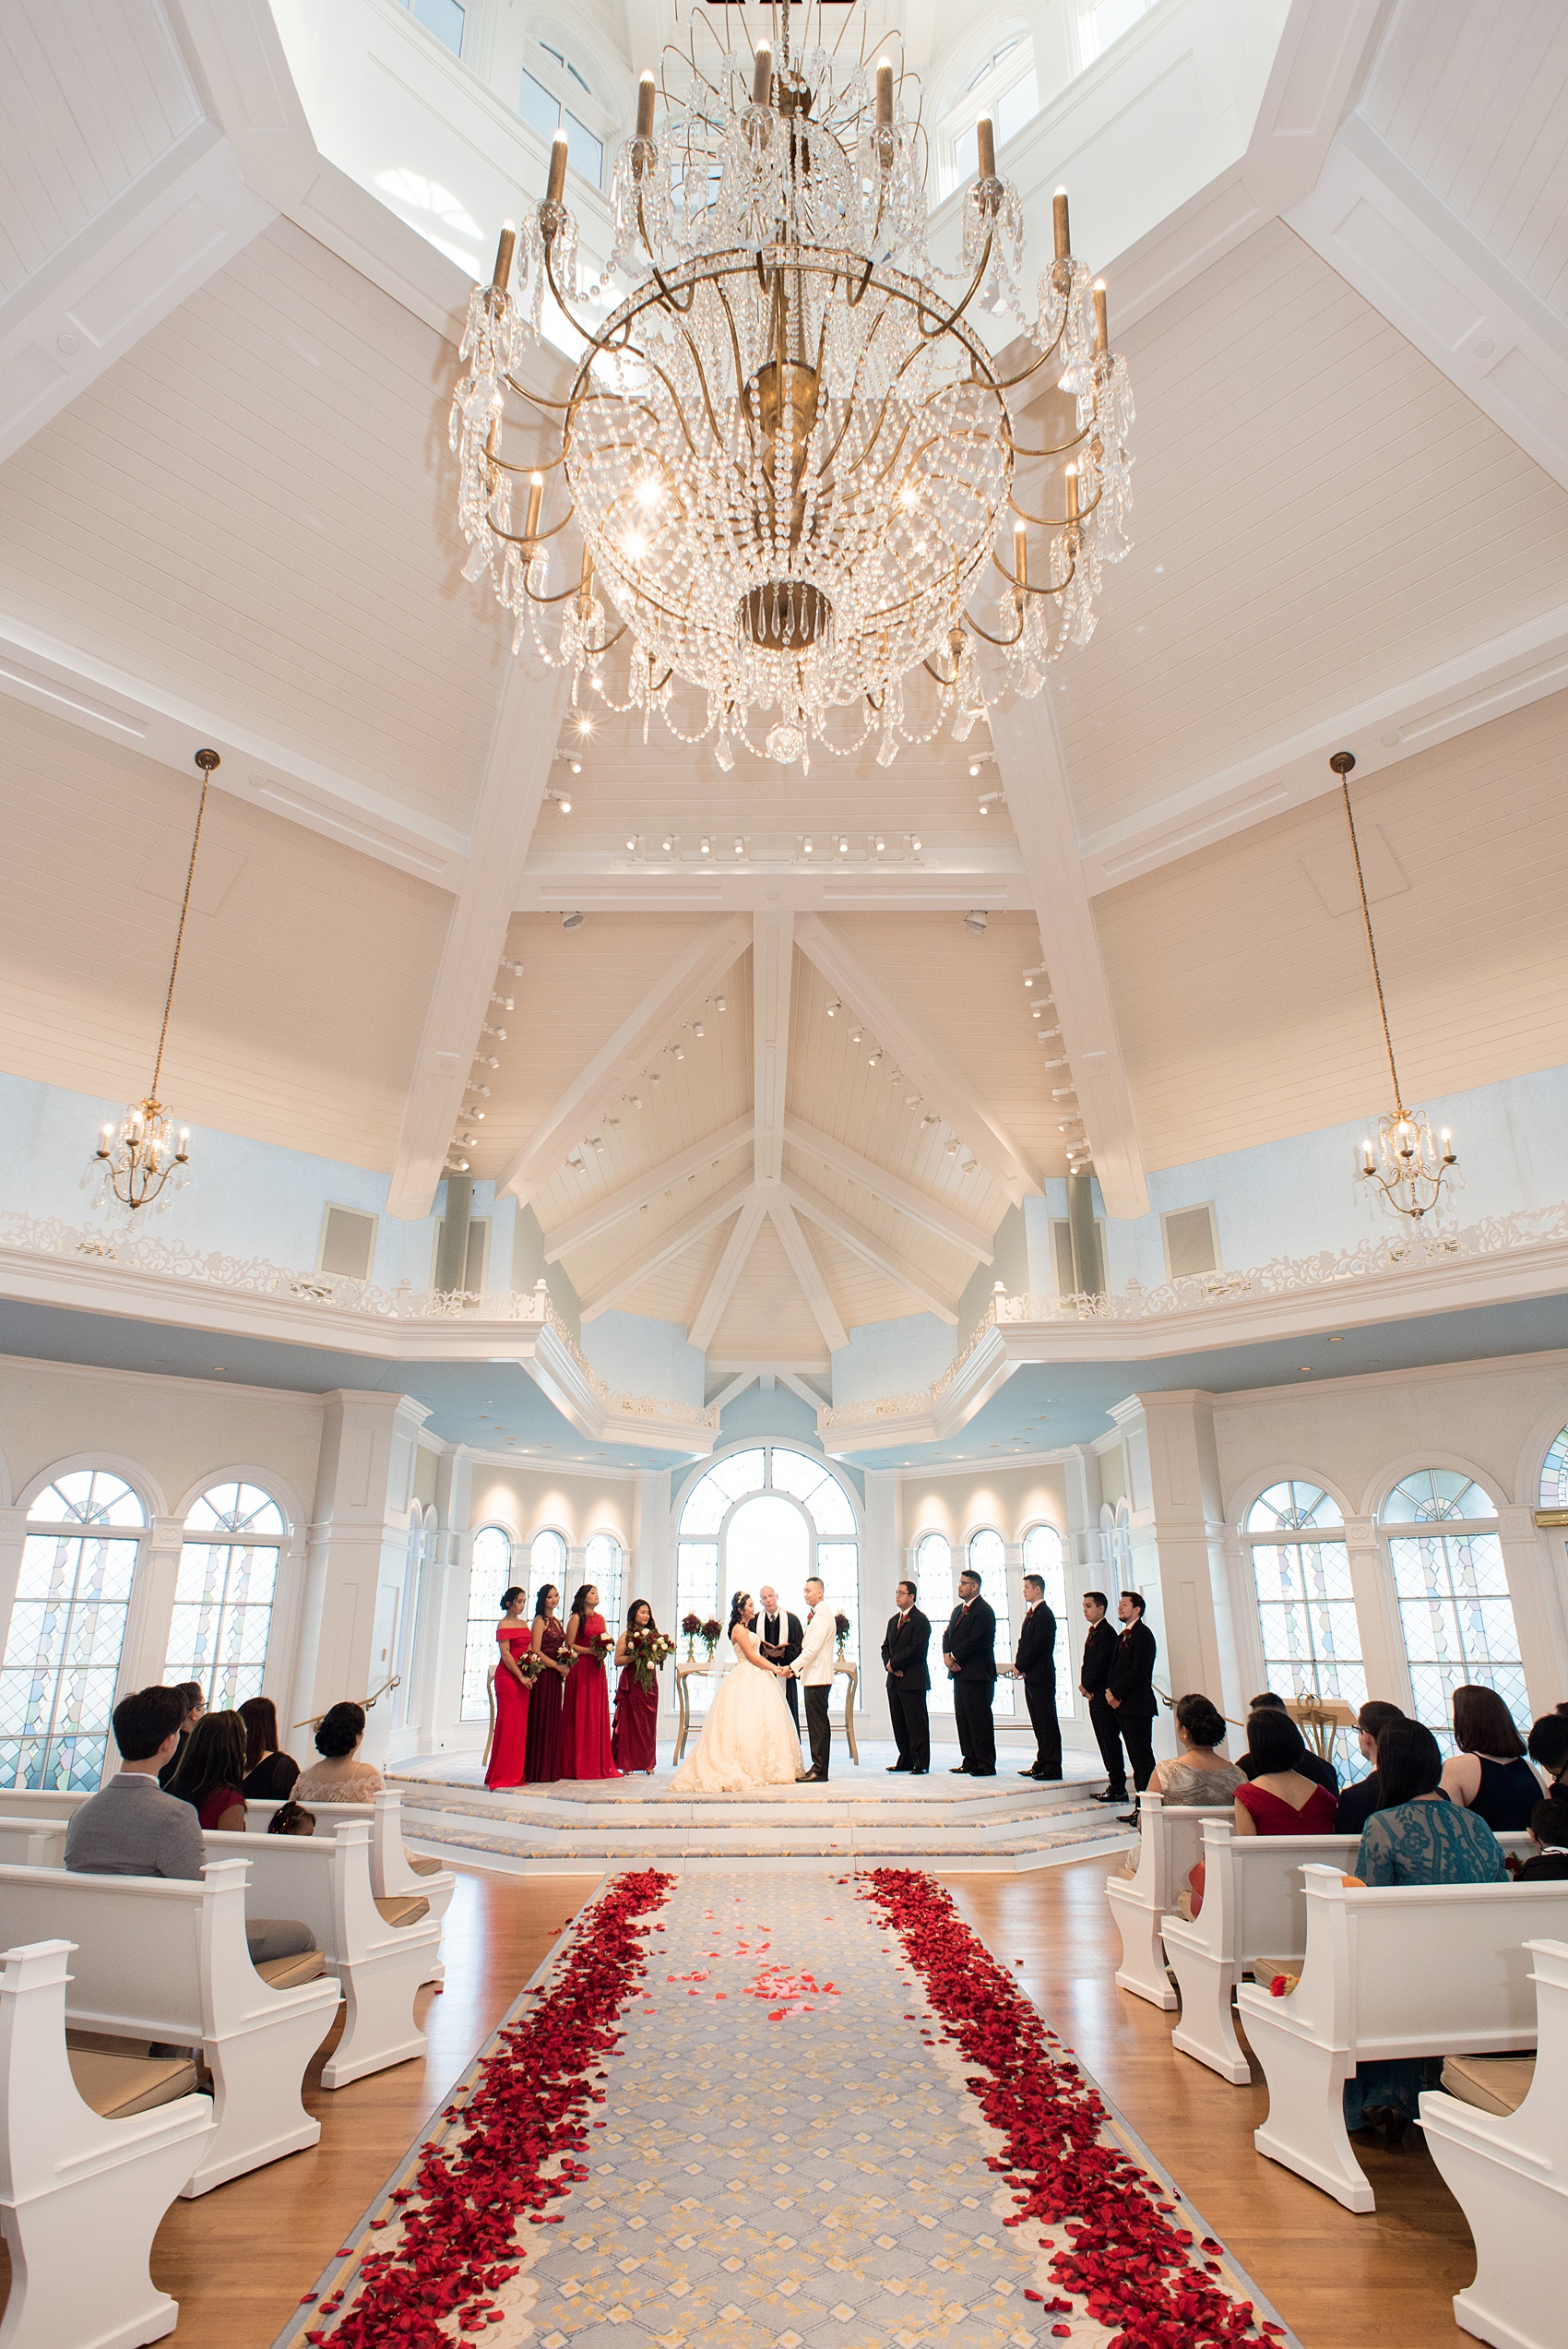 Photographs of a Walt Disney World wedding by Mikkel Paige Photography will give you ideas for a tasteful Beauty and the Beast theme. There was a glass dome with a red rose inside at the start of the ceremony with red rose petals scattered down the aisle for a small, intimate guest list at the Wedding Pavilion next to the Grand Floridian resort. #disneywedding #disneybride #waltdisneyworld #DisneyWorldWedding #DisneyCeremony #DisneyWorldWeddingPavilion